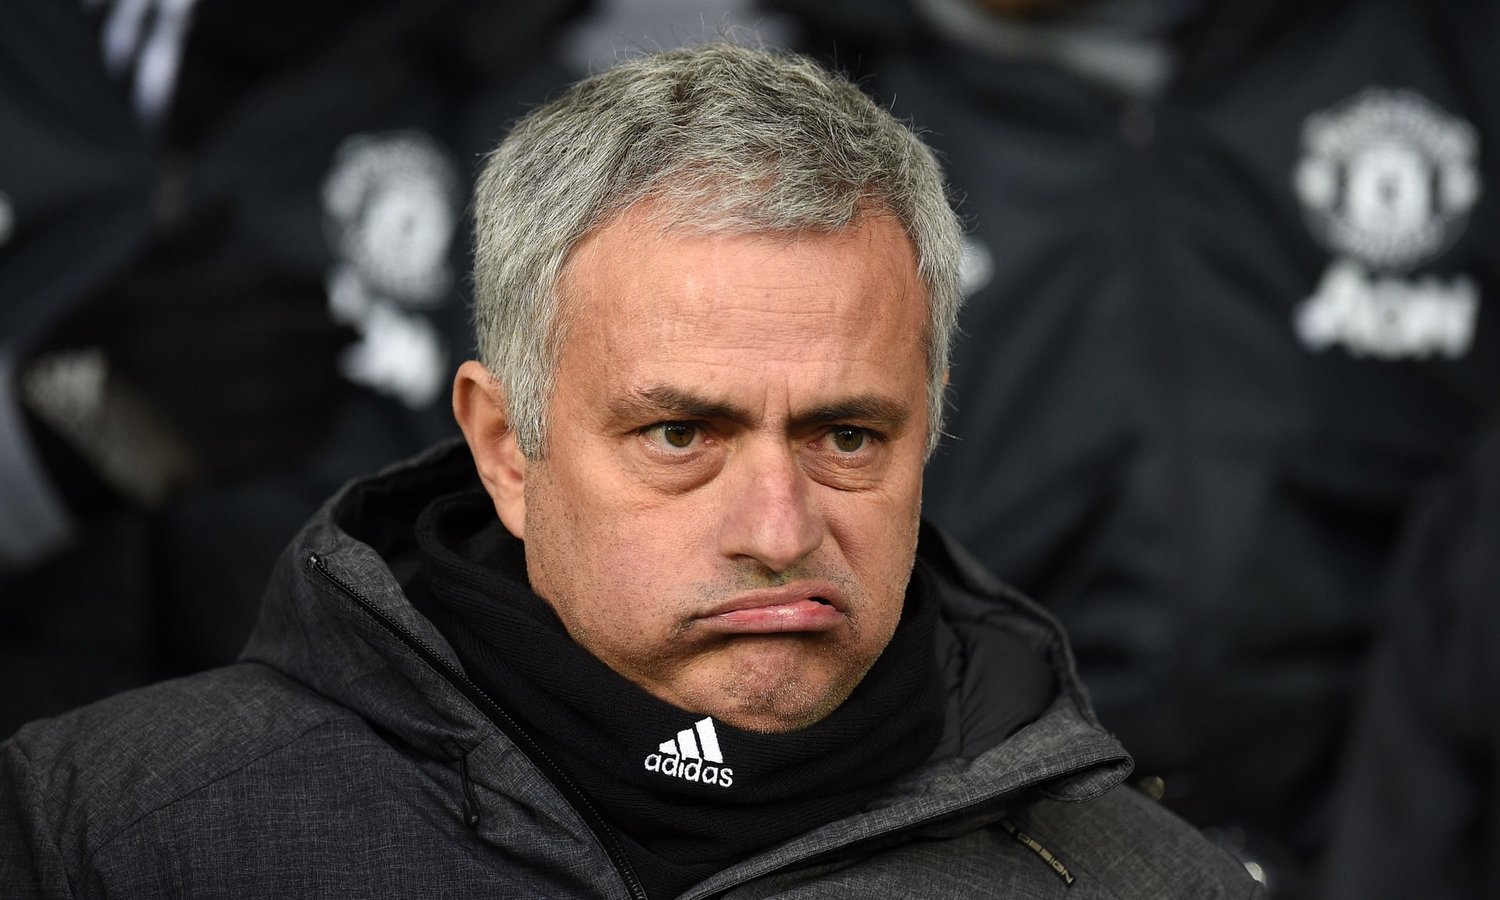 José Mourinho accused some of his Manchester United players of making ‘childish decisions’ in the final minutes of the draw with Leicester. Photograph: Oli Scarff/AFP/Getty Images